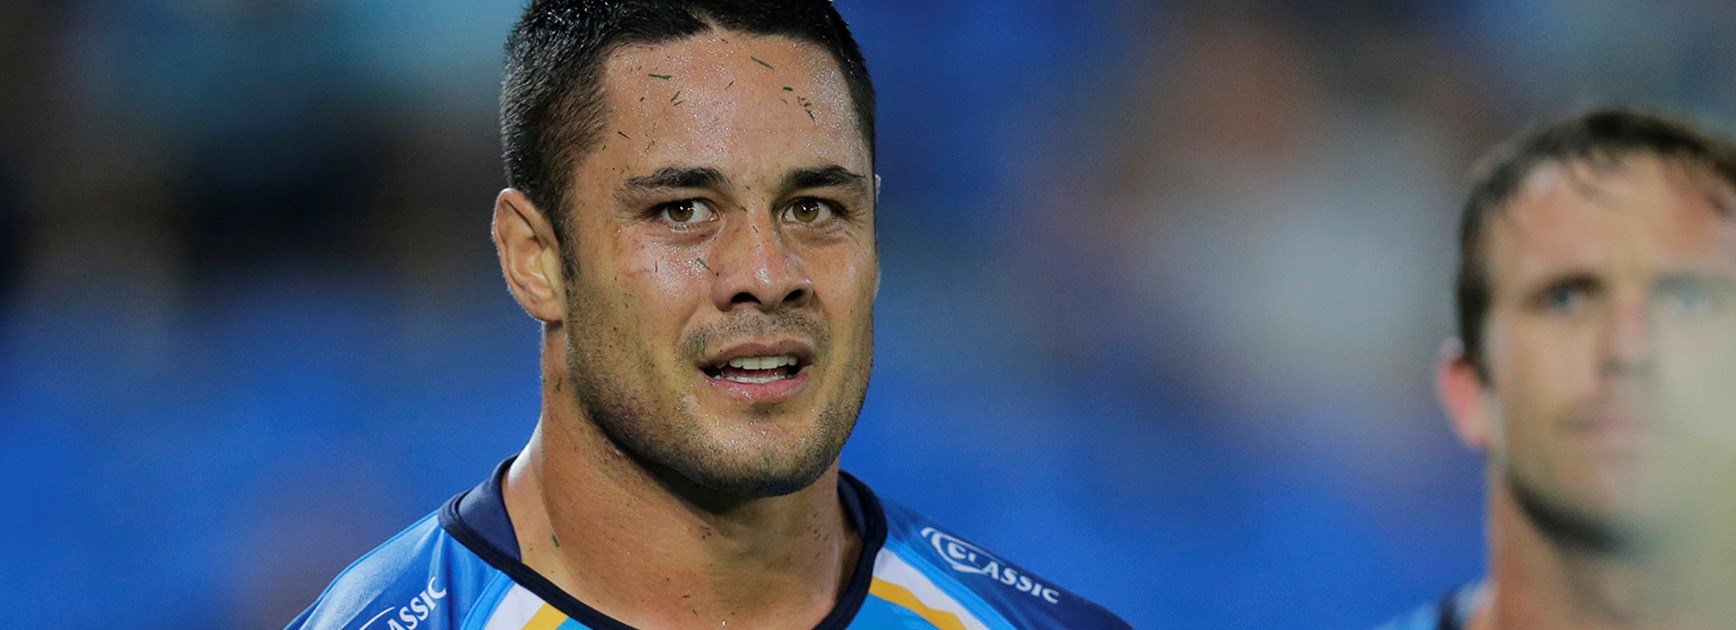 Gold Coast Titans fullback Jarryd Hayne could miss a month of football with an ankle injury.